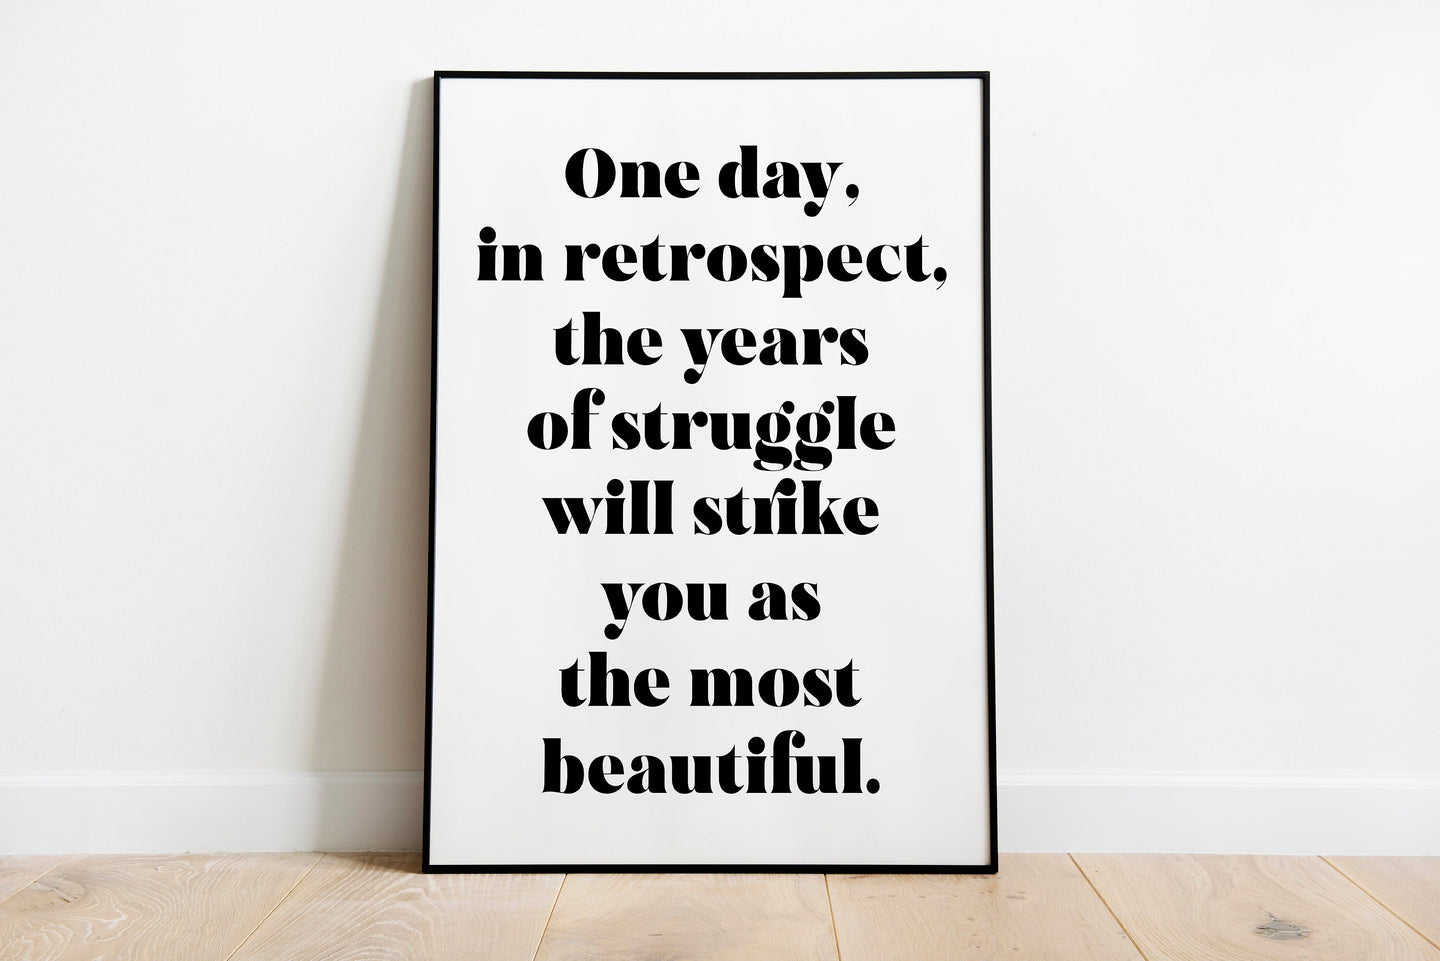 Freud quote - One day, in retrospect, the years of struggle - psychology wall art